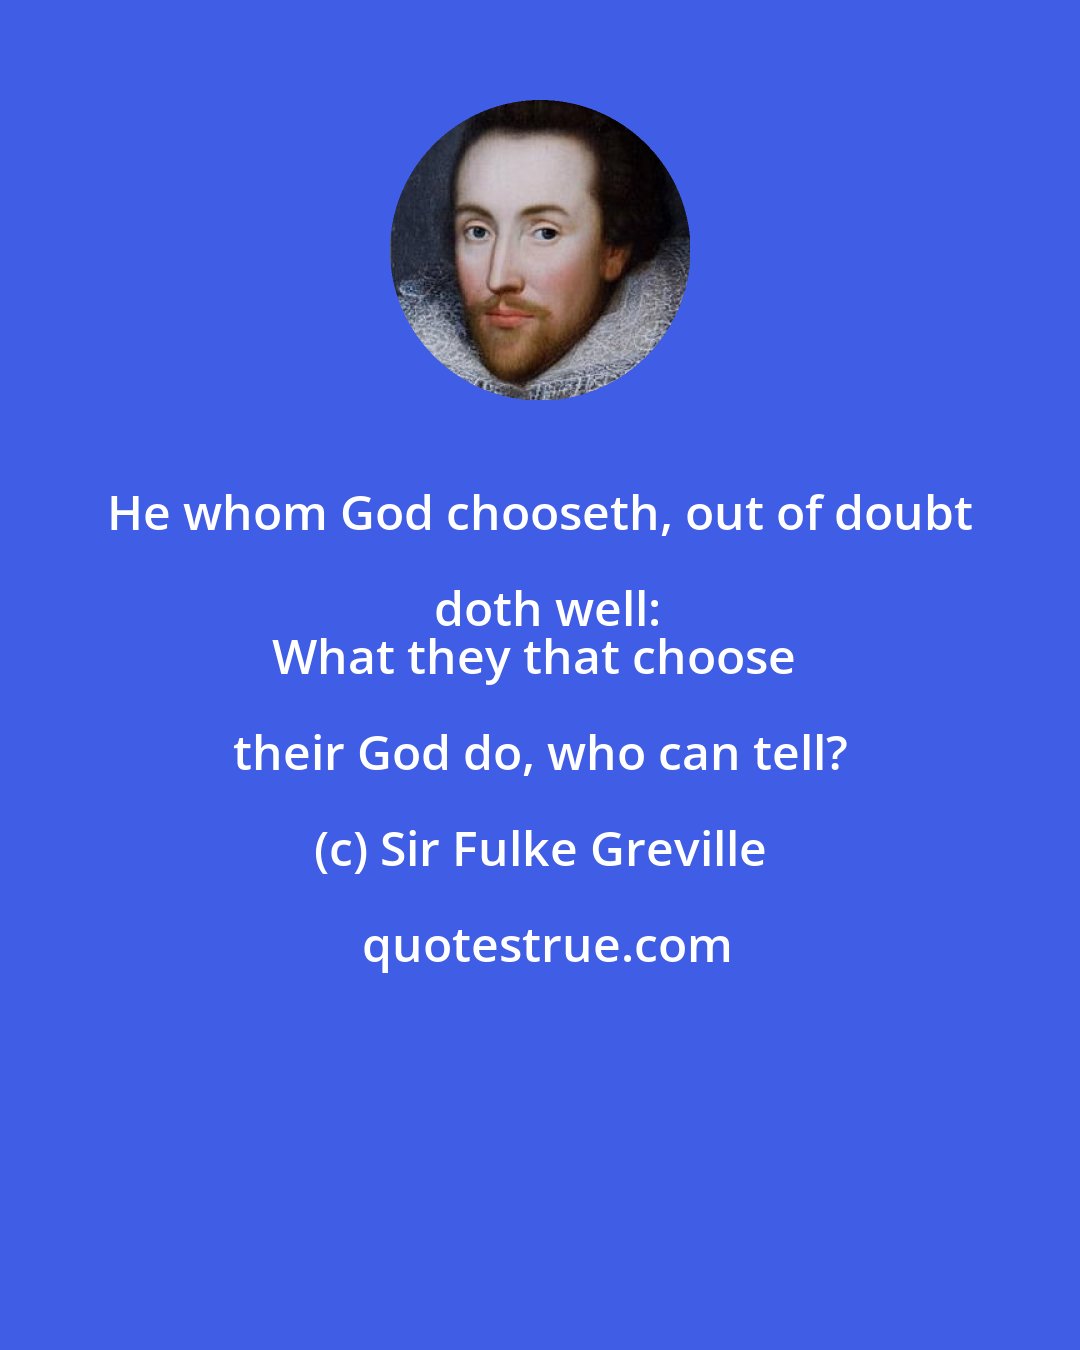 Sir Fulke Greville: He whom God chooseth, out of doubt doth well:
What they that choose their God do, who can tell?